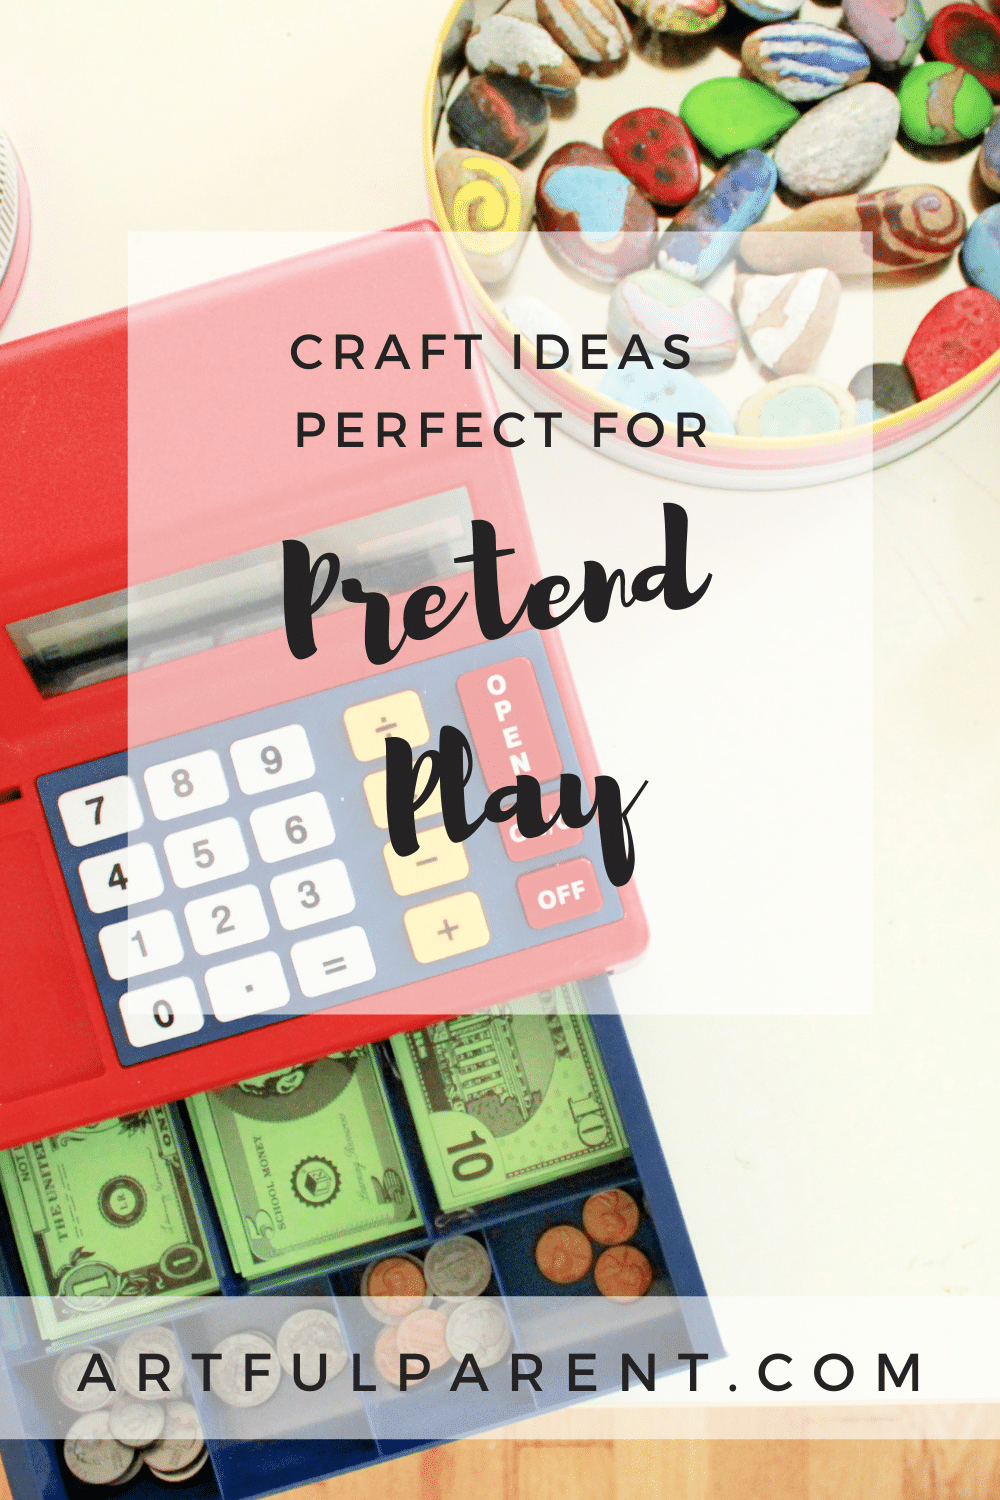 Craft Ideas Perfect for Pretend Play